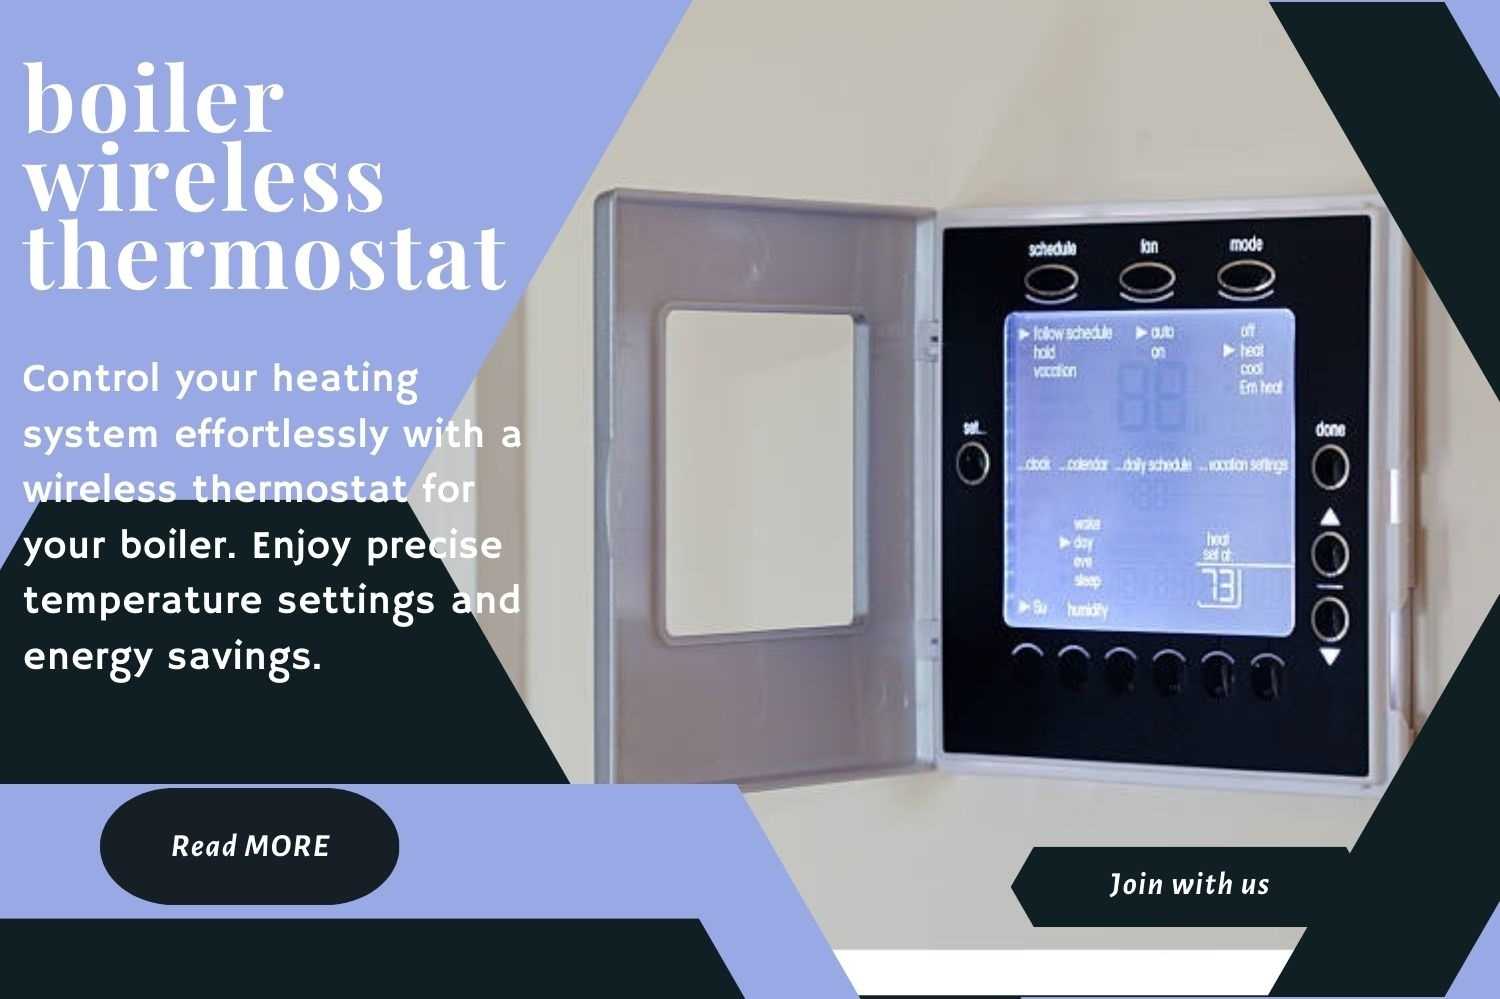 Boiler Wireless Thermostat: An Efficient and Convenient Heating Solution